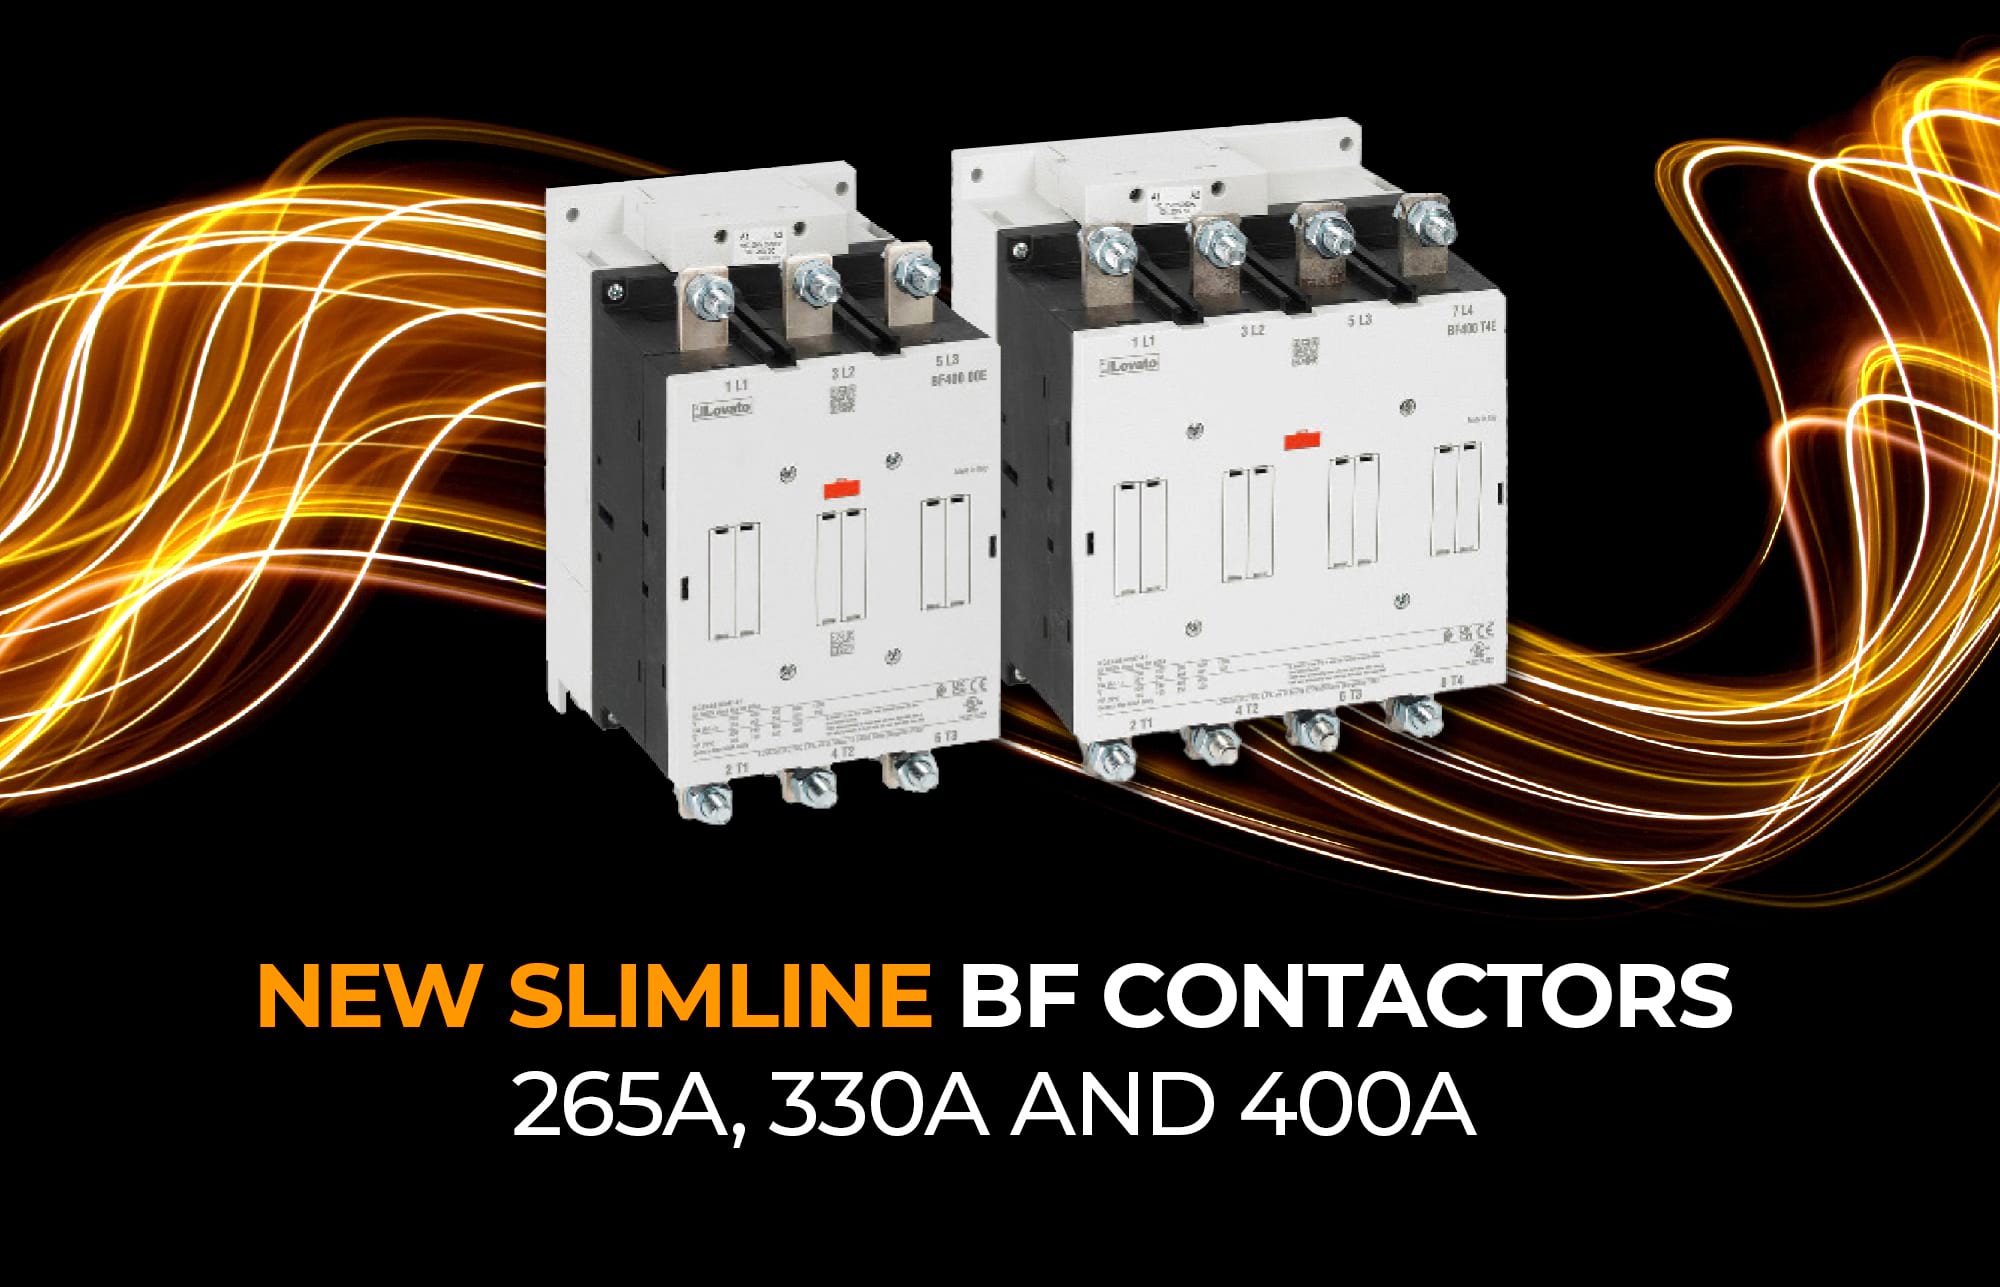 New slimline BF Contactors 265A, 330A and 400A